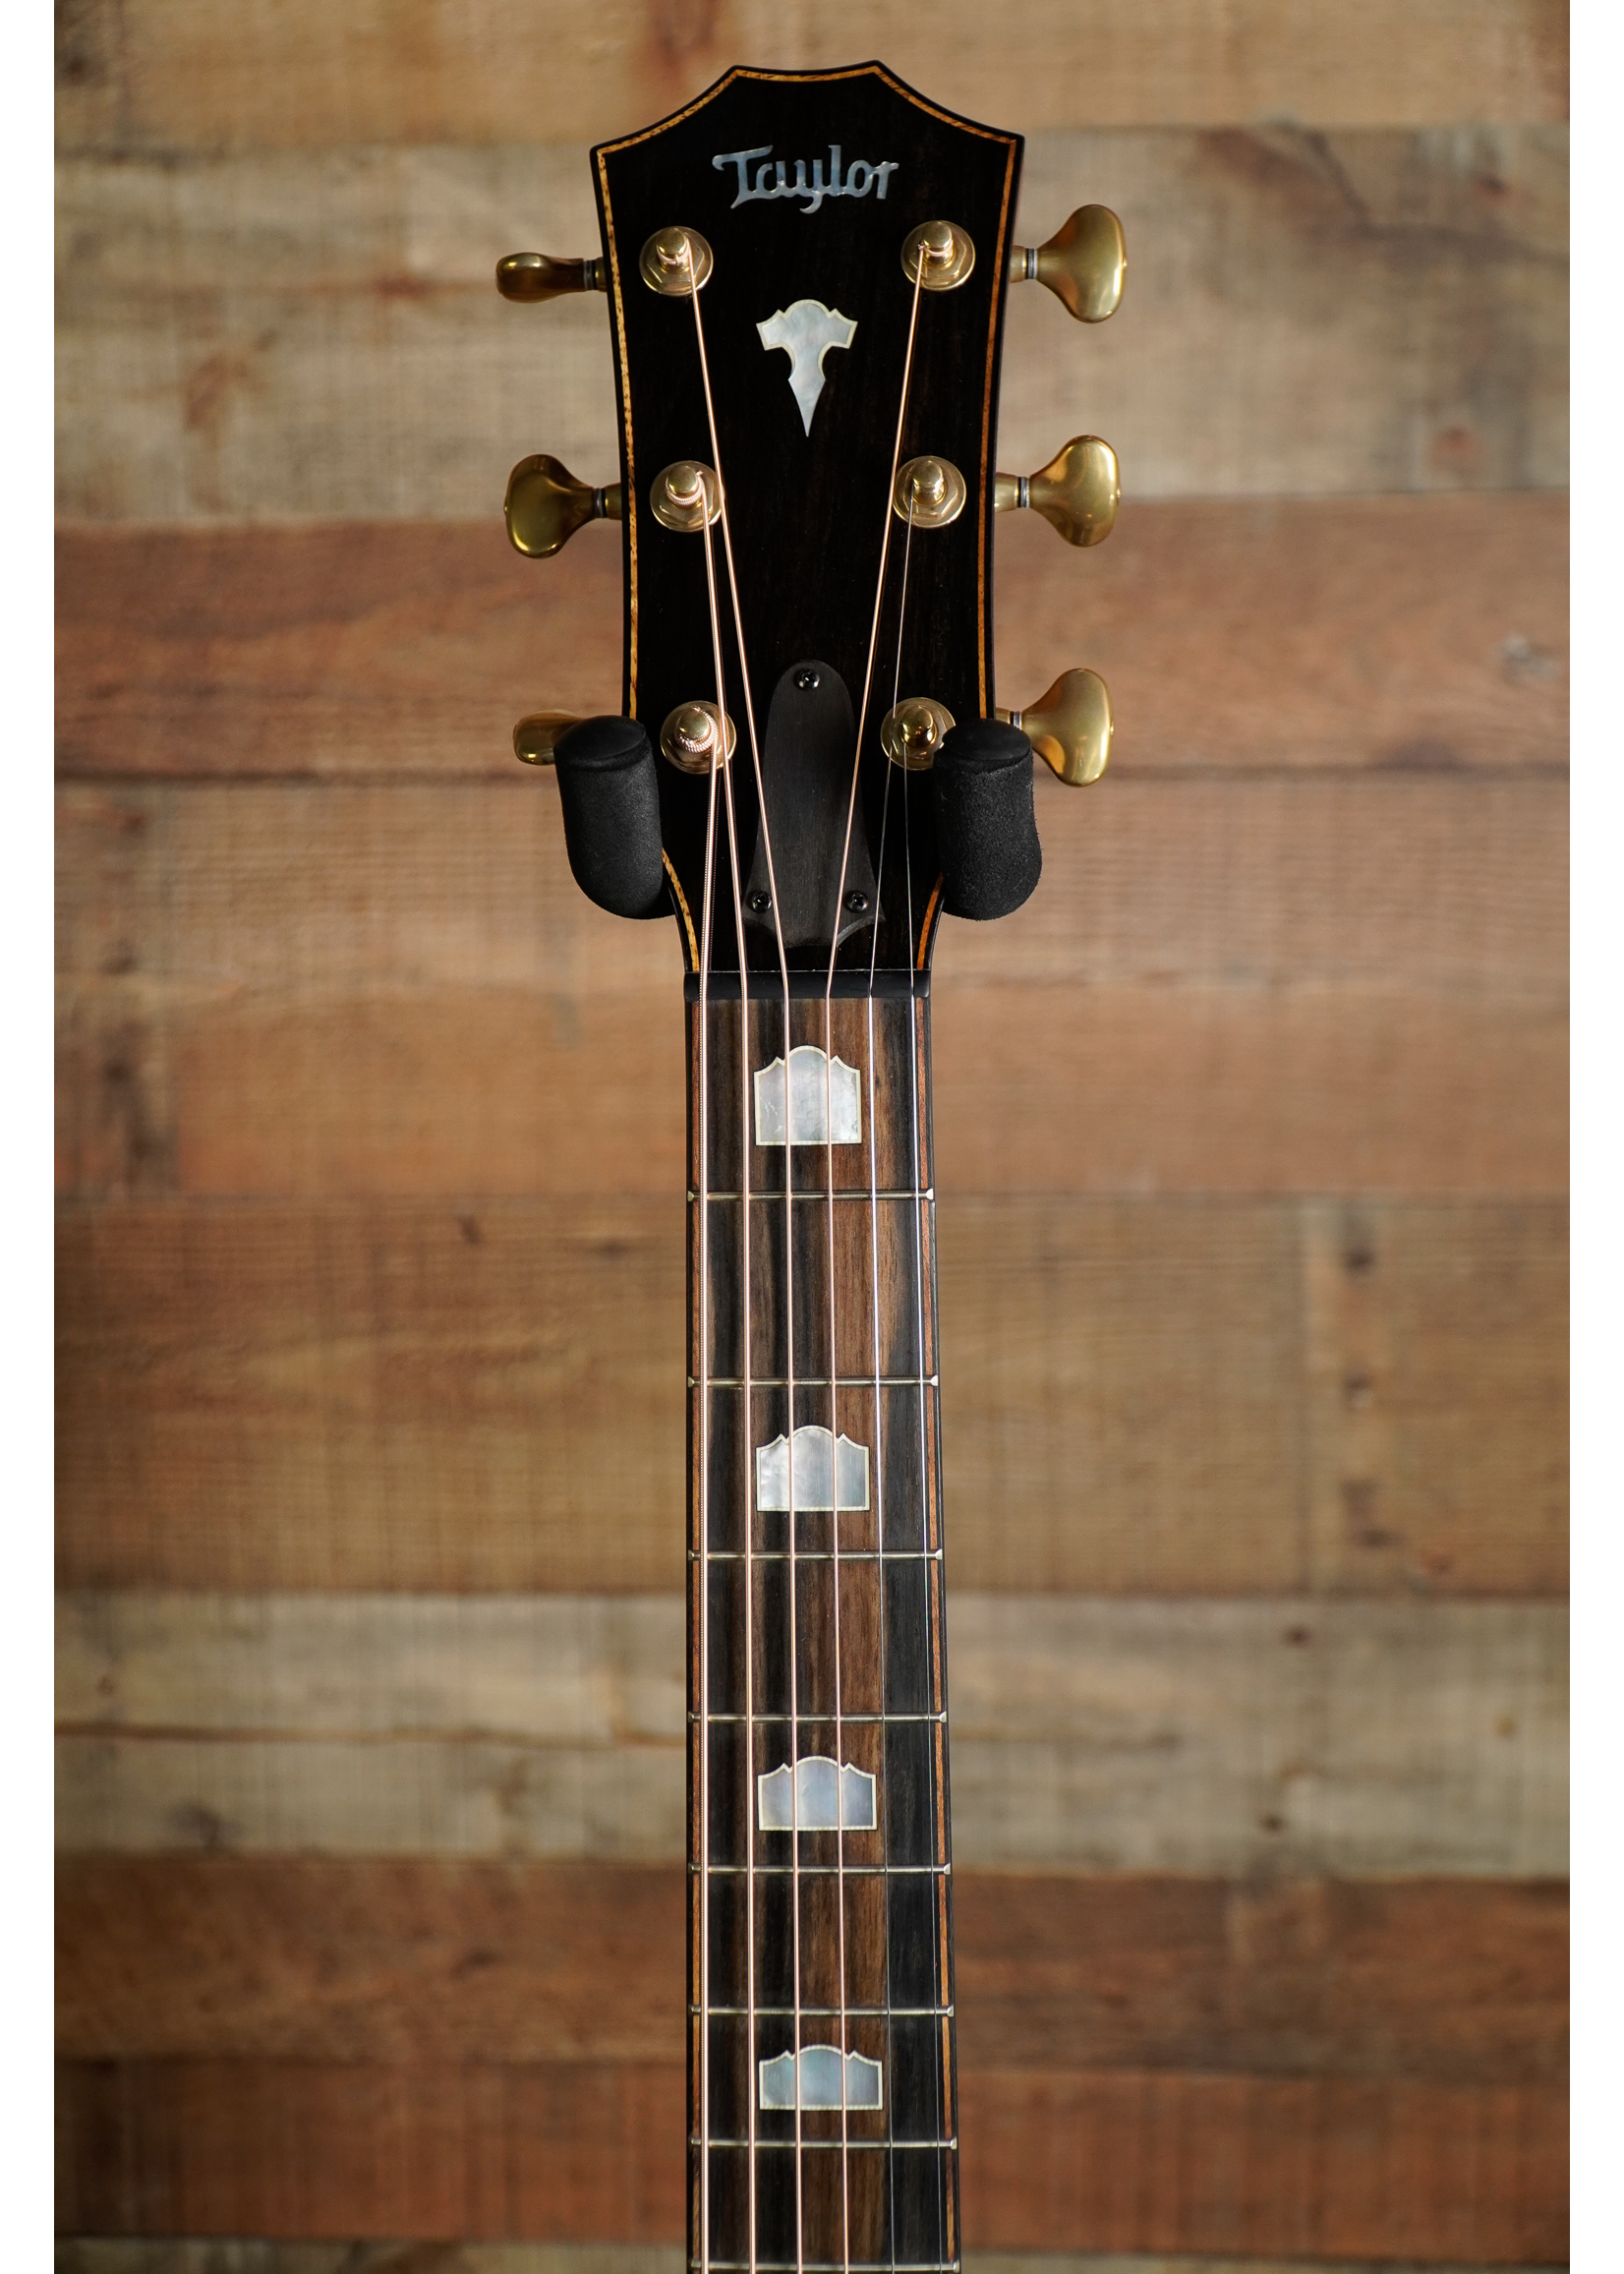 Taylor Taylor Custom #18 Namm Exclusive Only 50 Available Worldwide